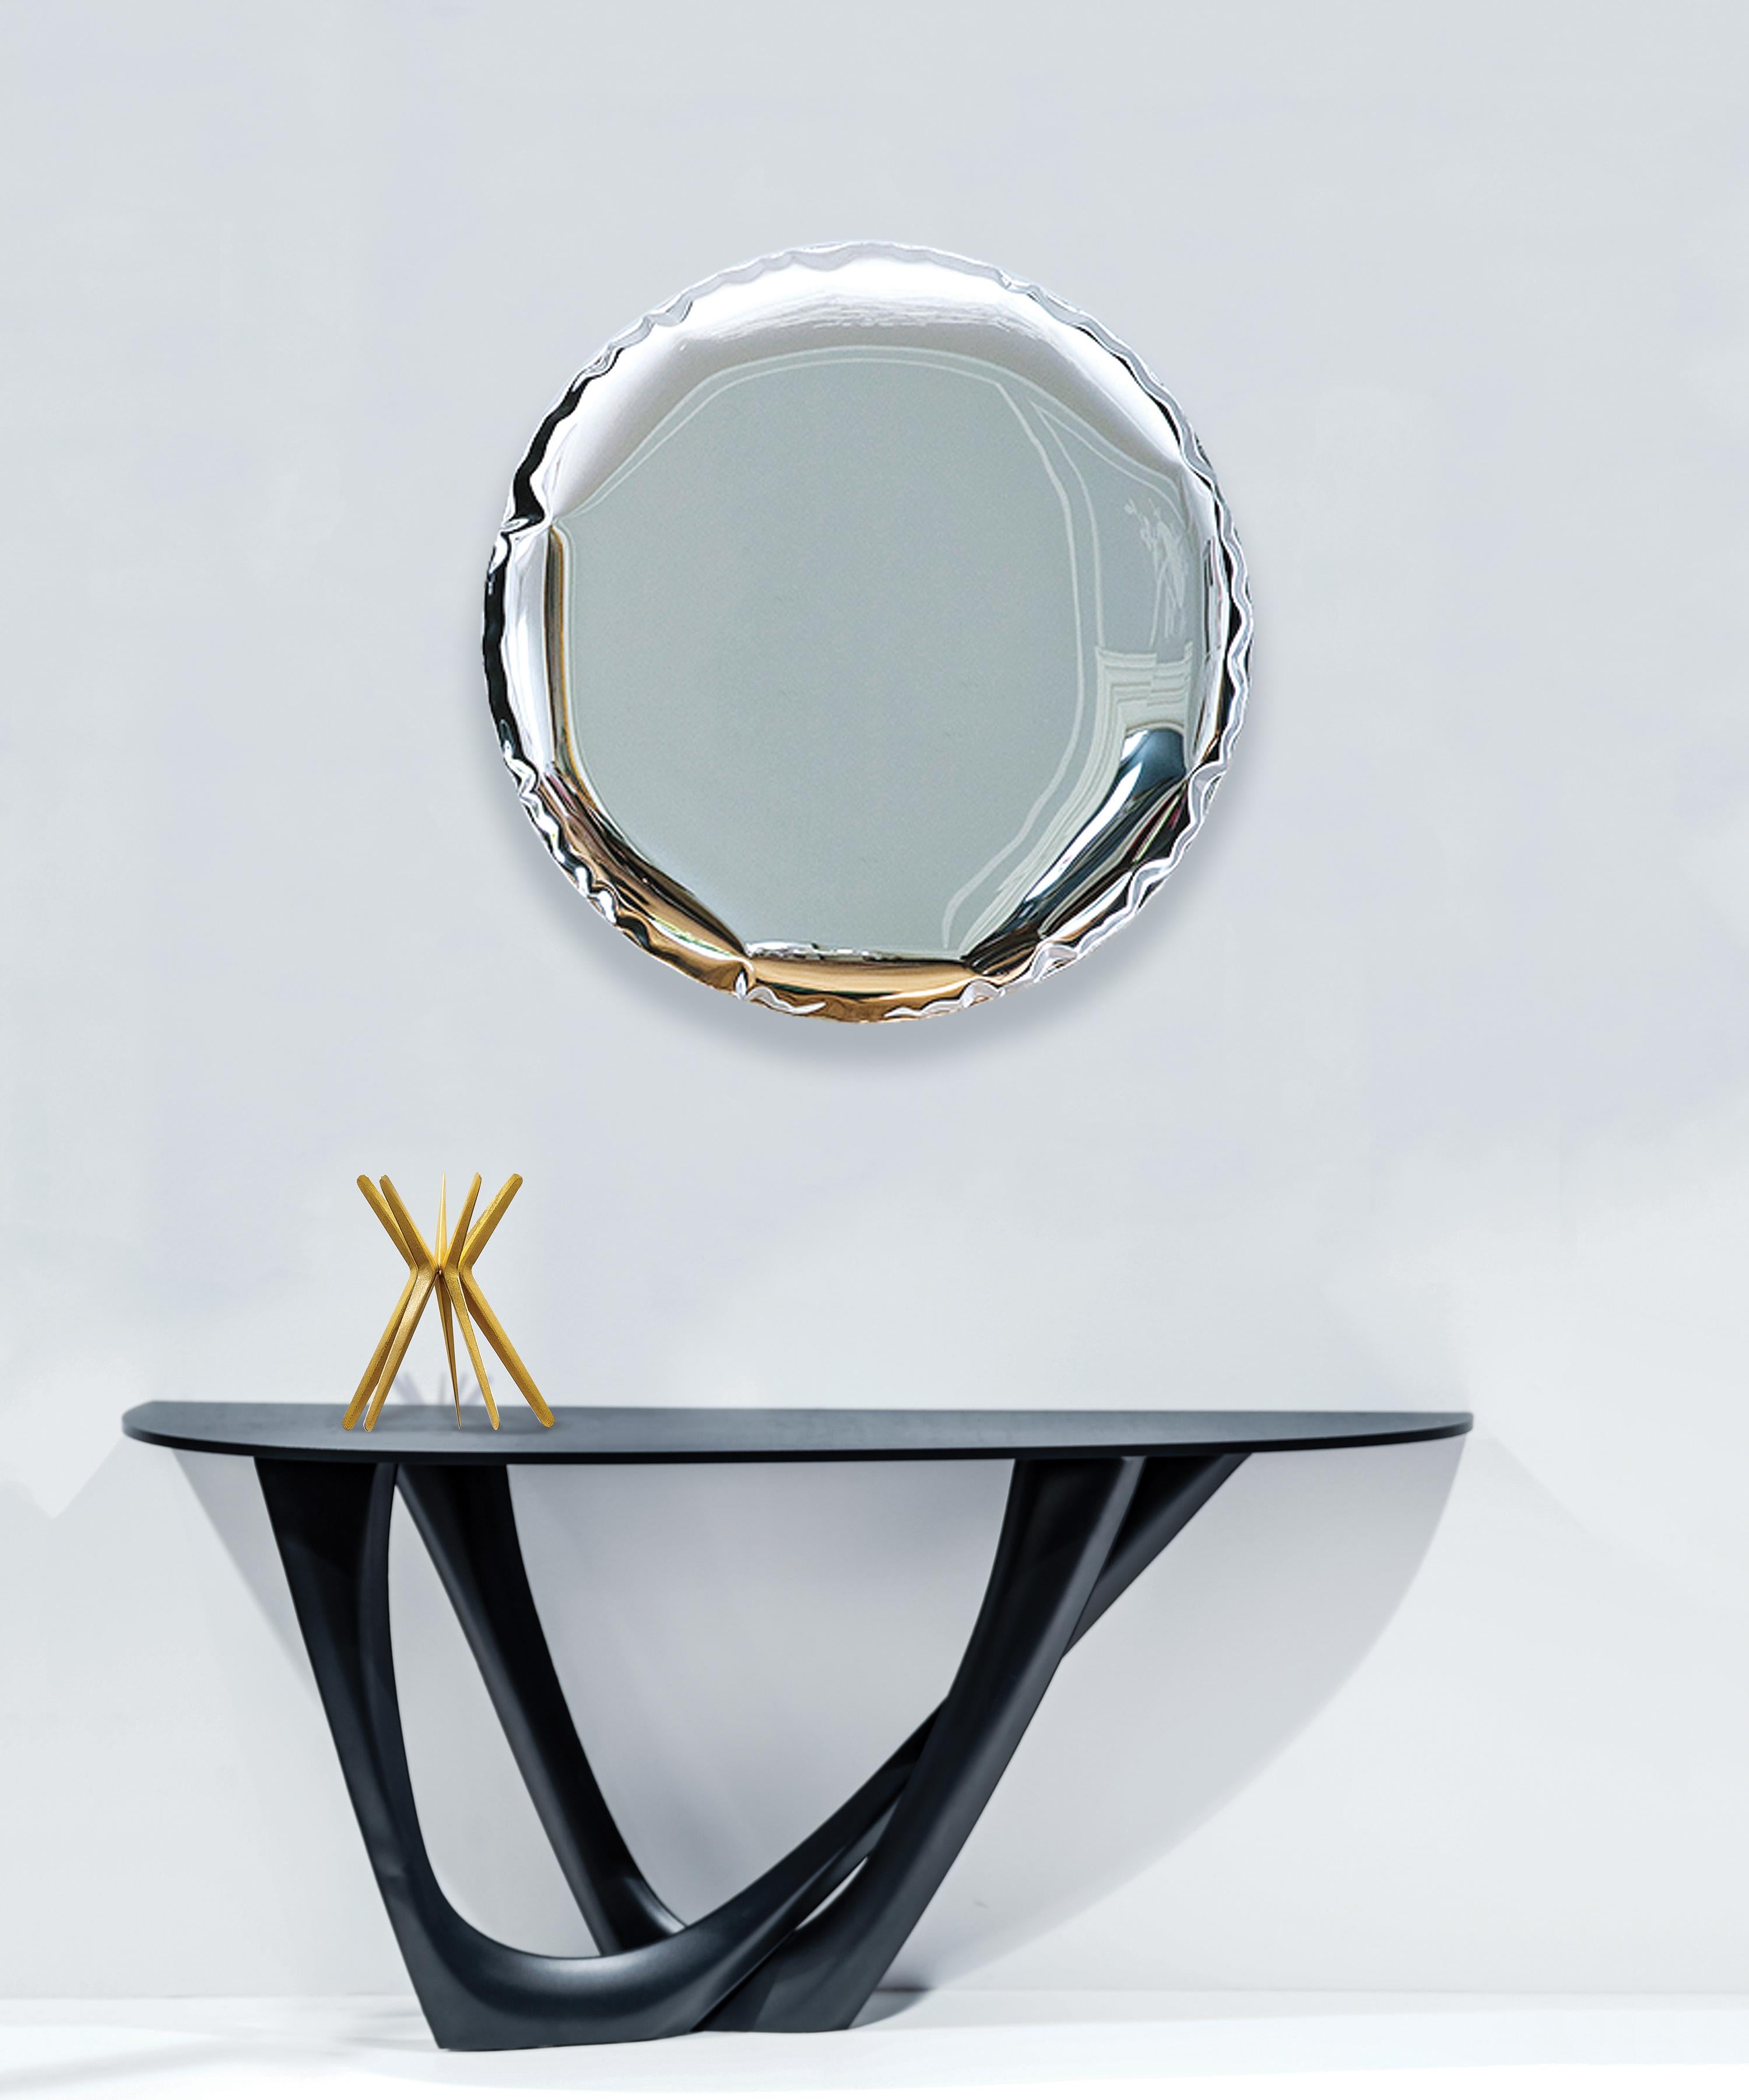 Helix Nebula Topaz Rhodonite Oko 75 Sculptural Wall Mirror by Zieta
Dimensions: ø 75 x D 6 cm. 
Material: Stainless steel. 
Finish: Helix Nebula Topaz Rhodonite transition. 

Available in different finishes. Also available in different sizes: ø 95,